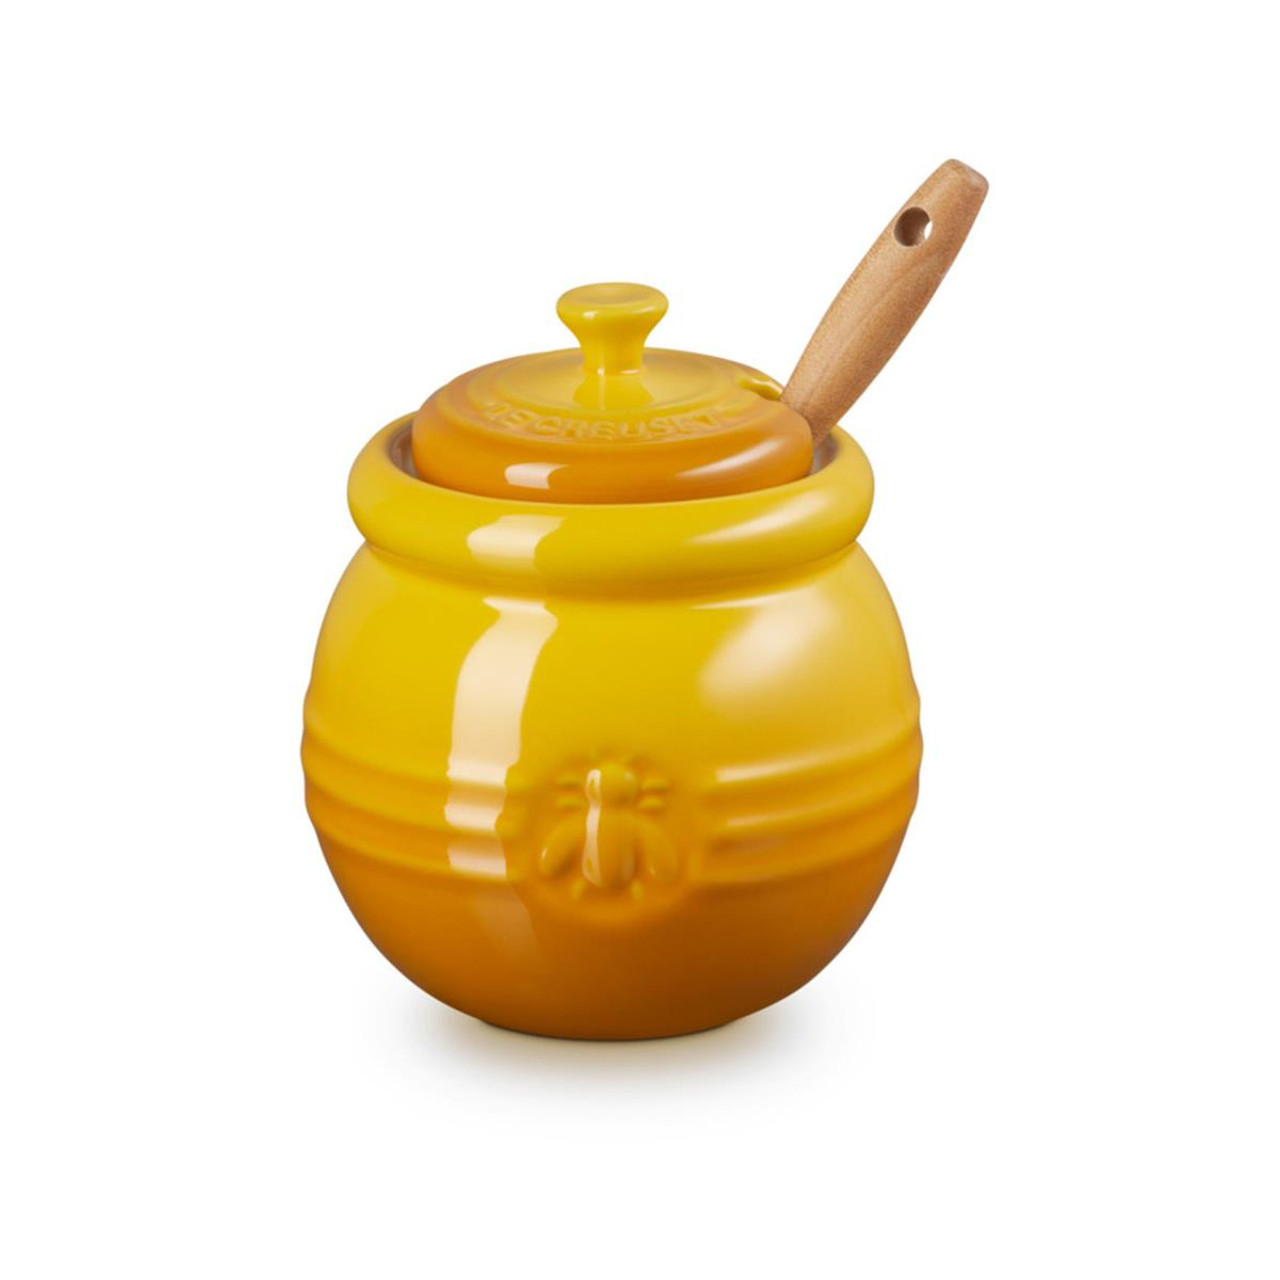 What makes cleaning the le creuset honey pot effortless?